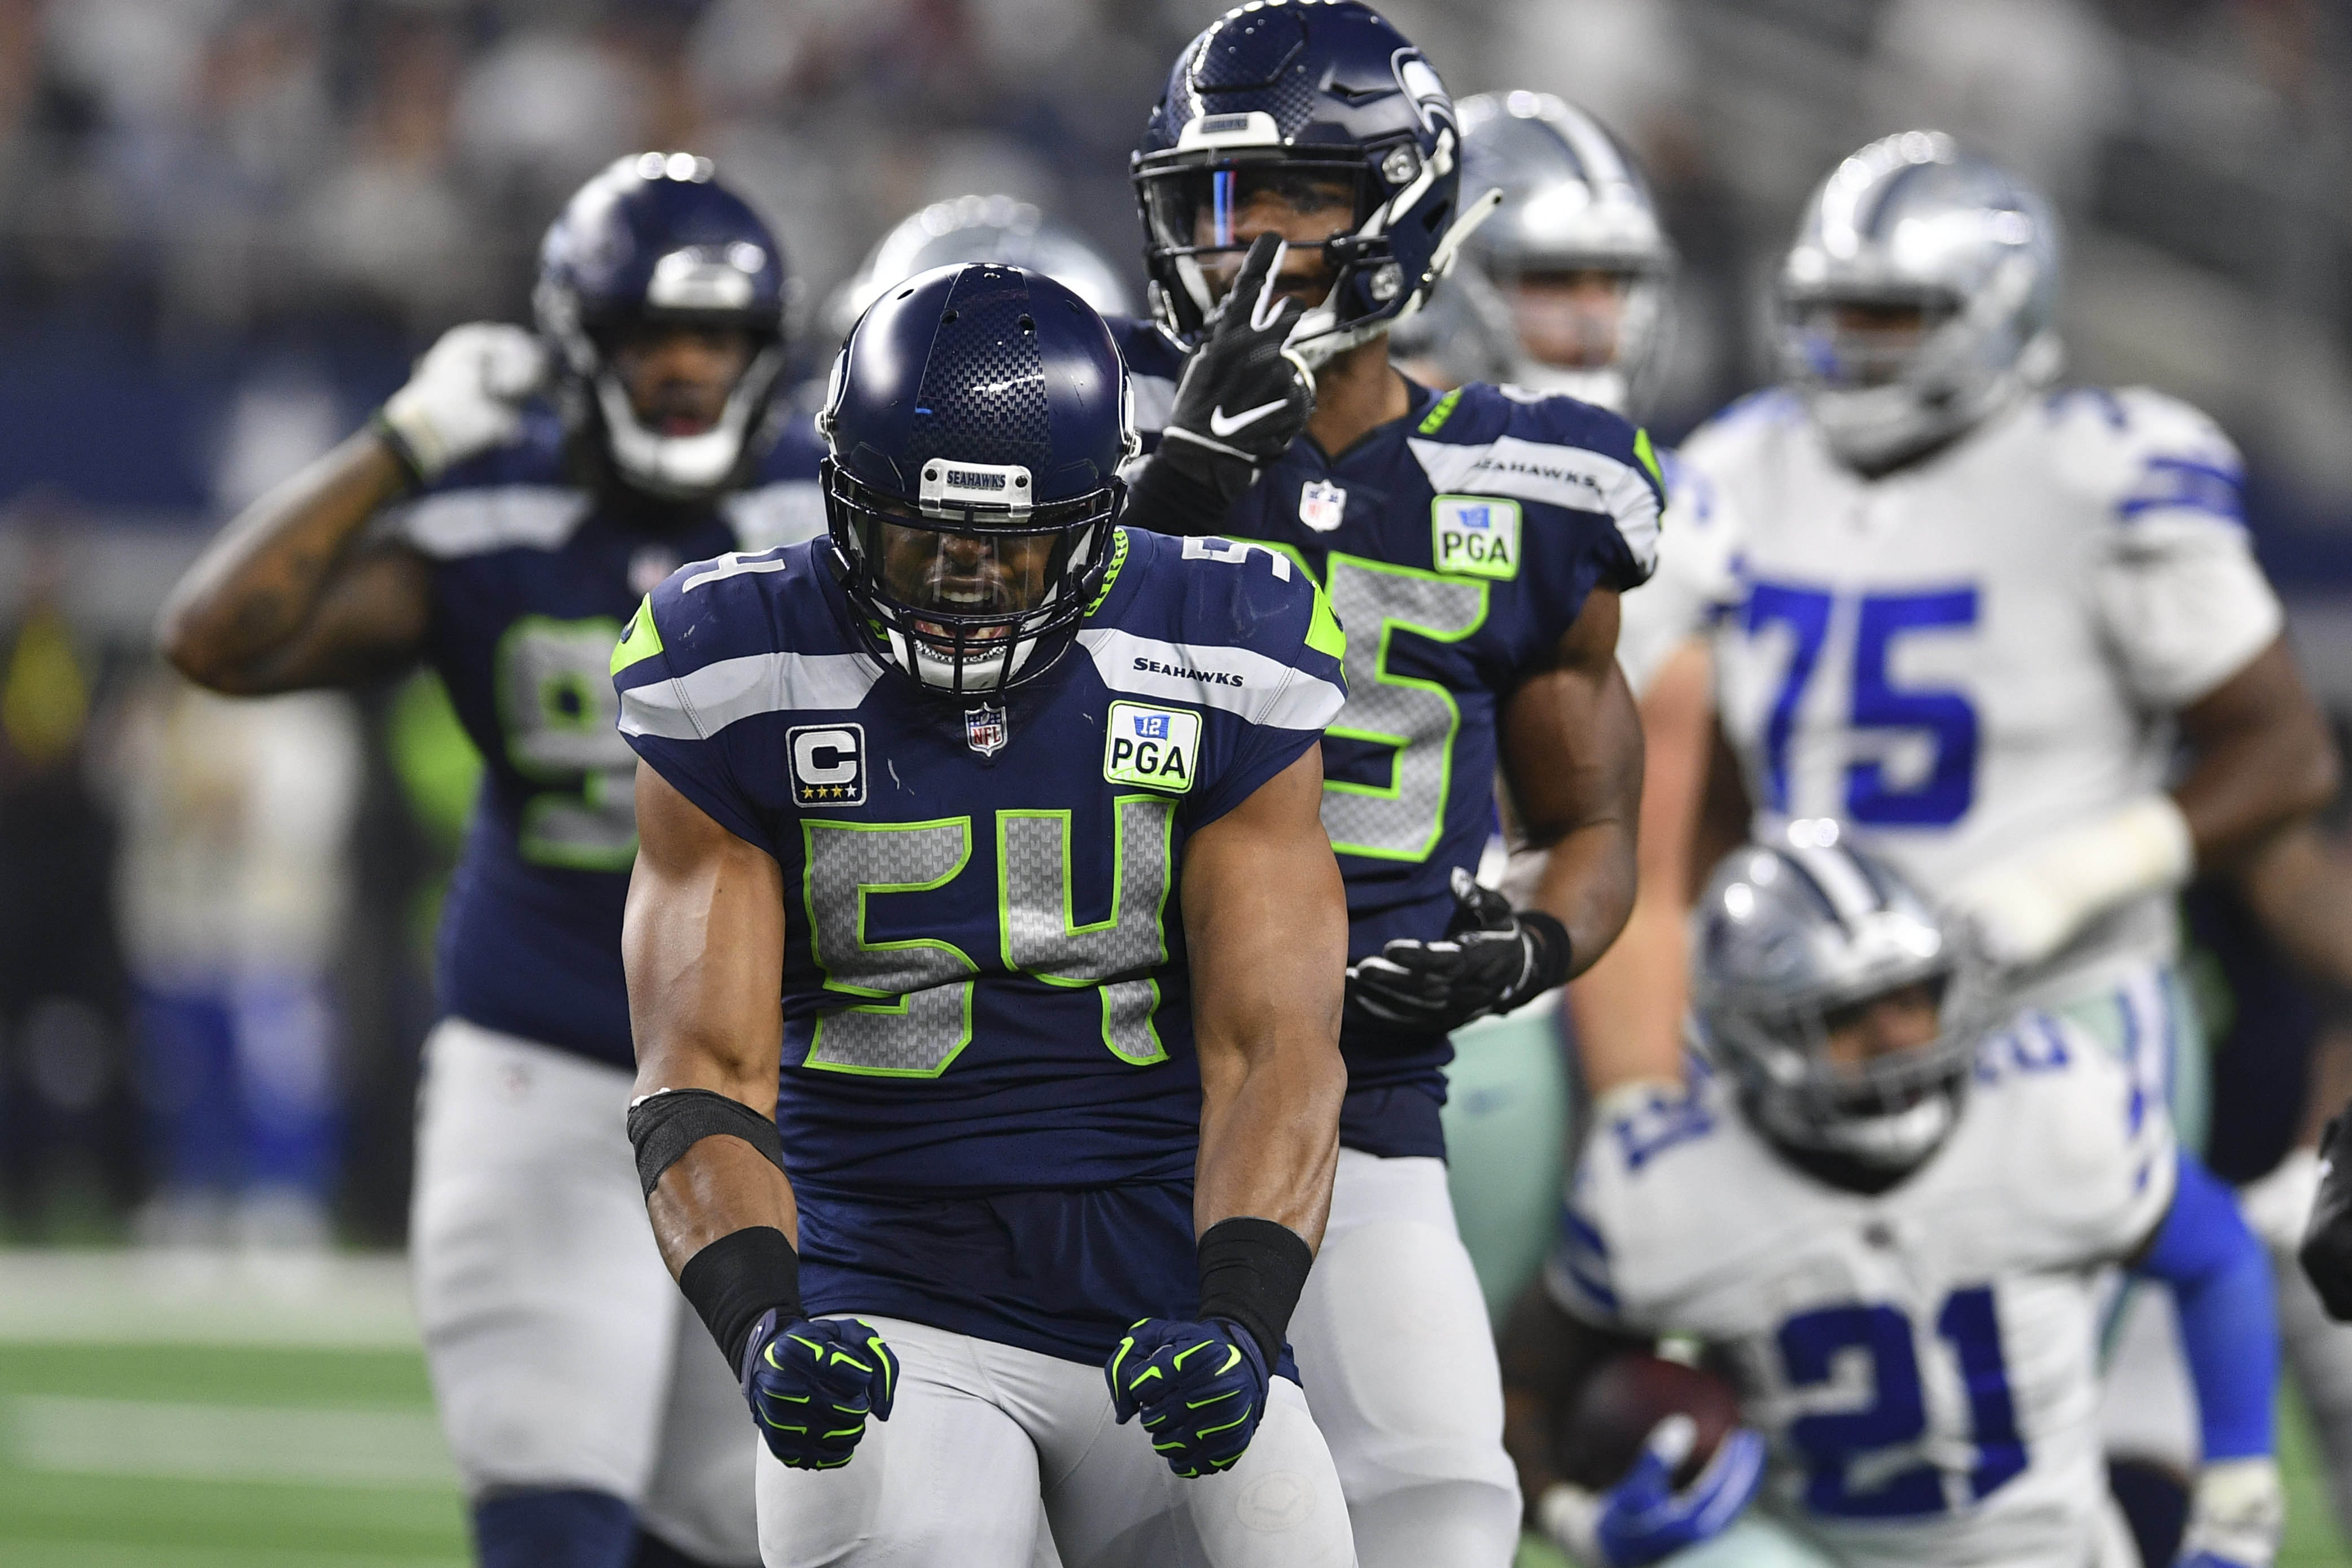 Will Bobby Wagner Inspire Other NFL Players To Strike Their Own Deals?